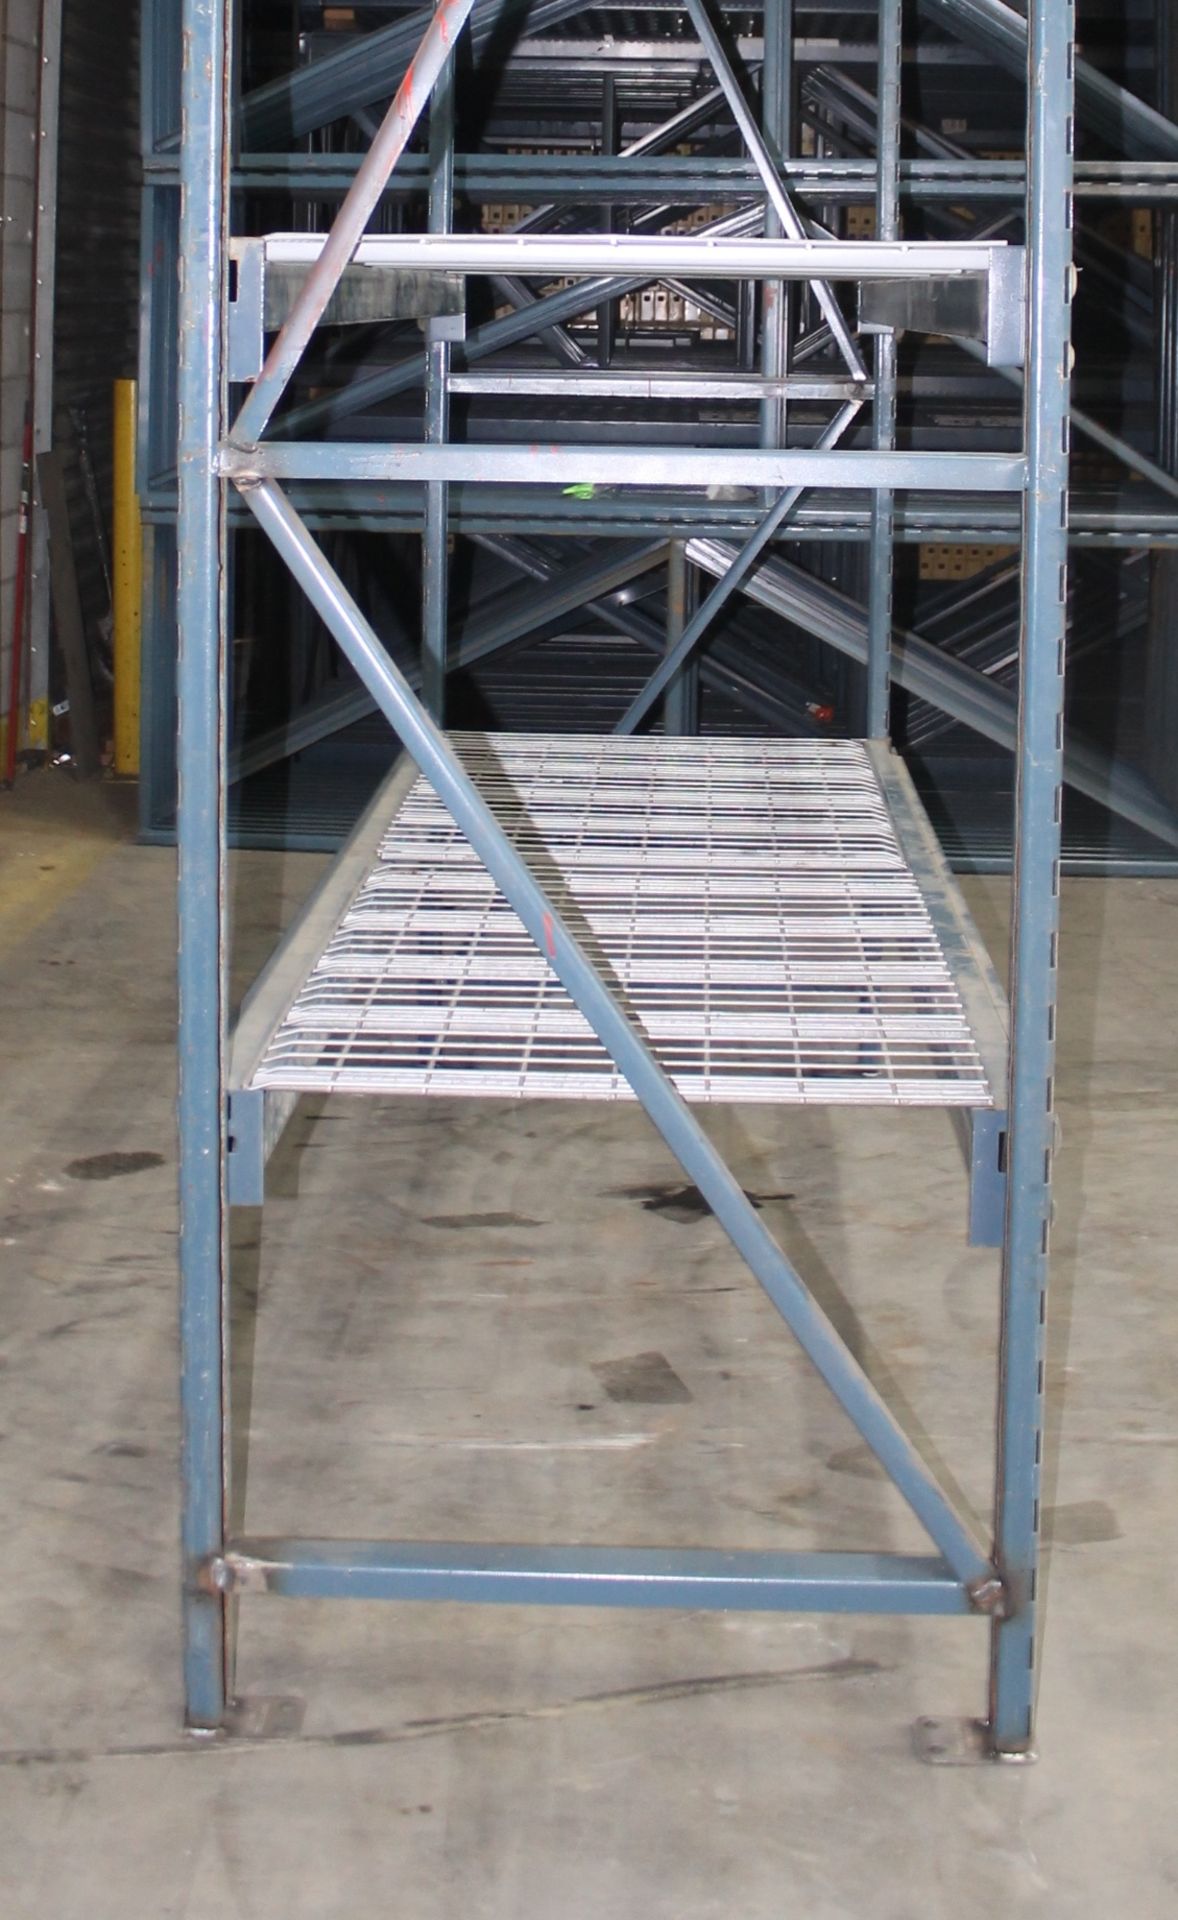 120"H X 36"D X 96"L STOCK ROOM SHELVING (14 BAYS) - Image 3 of 4